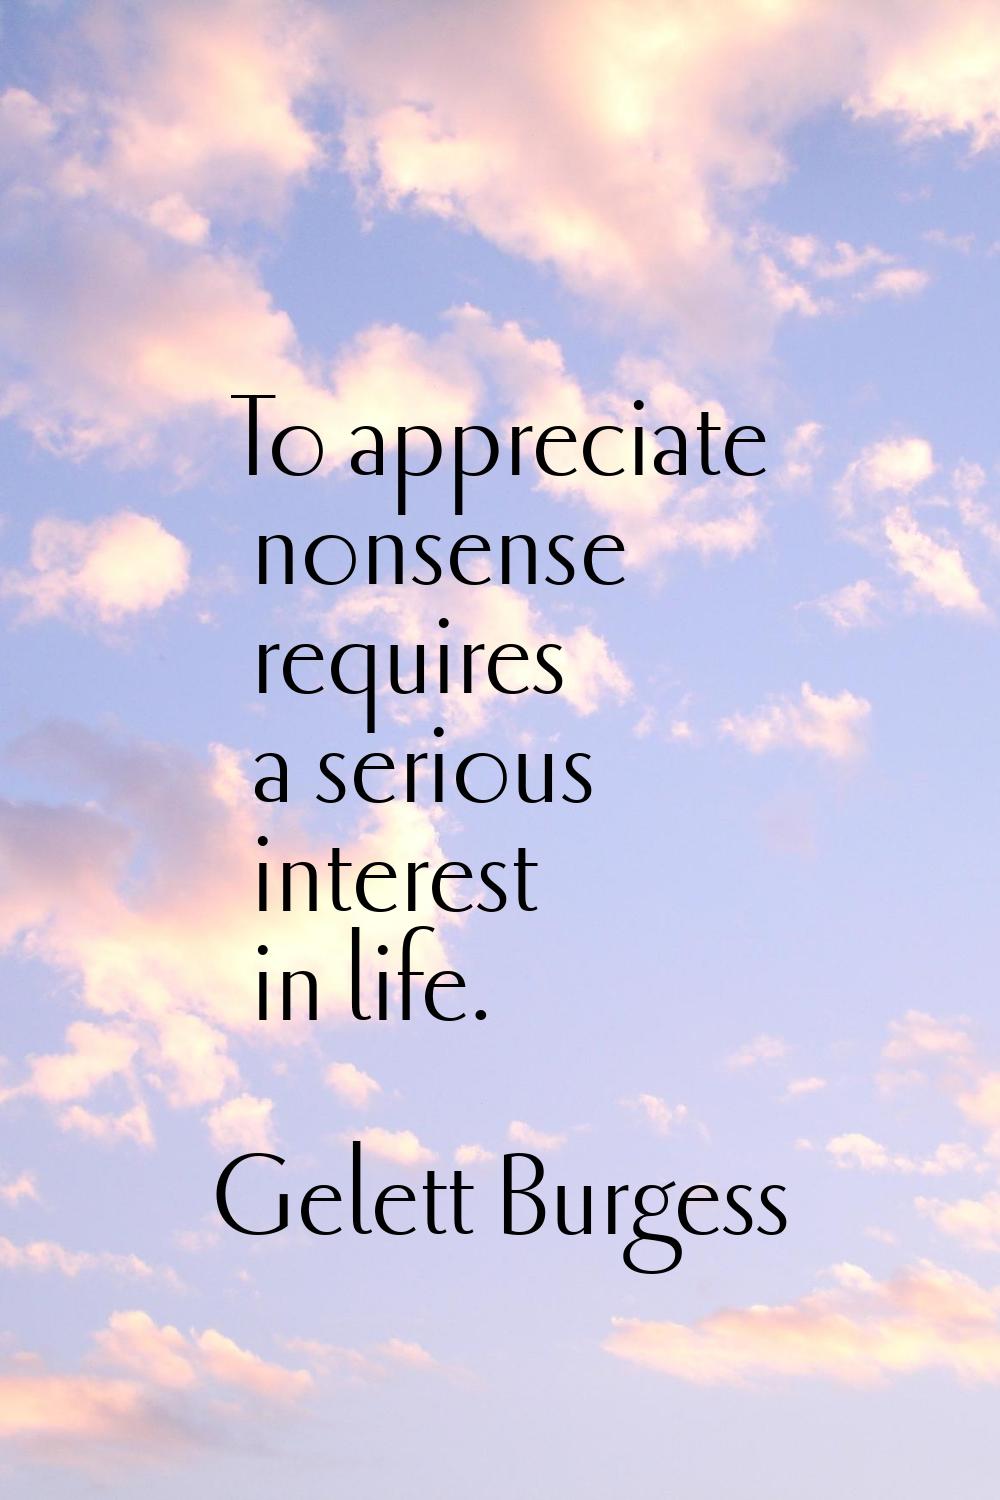 To appreciate nonsense requires a serious interest in life.